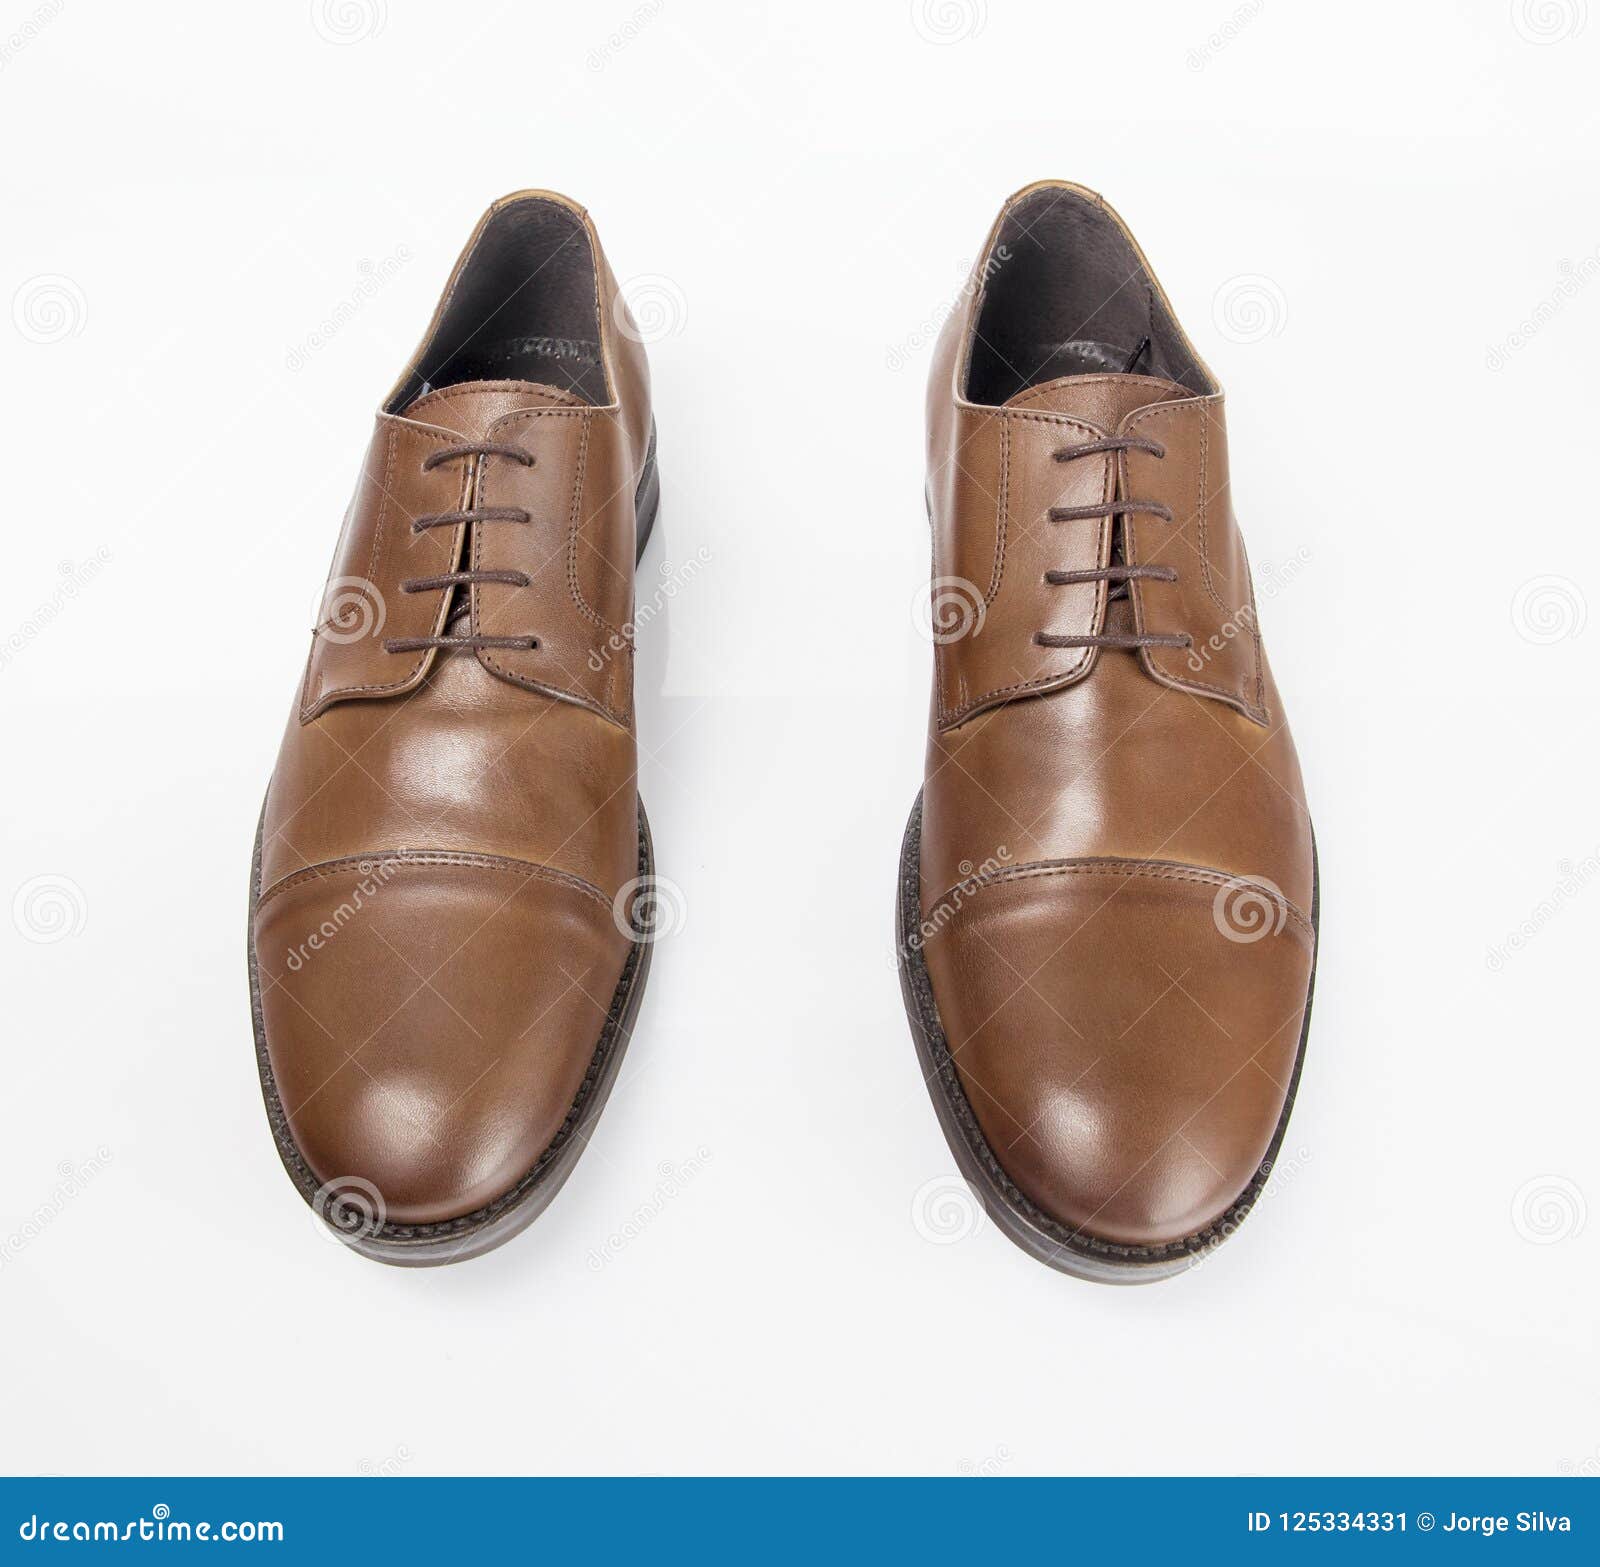 Male Brown Shoes Leather, Footwear. Stock Image - Image of elegant ...